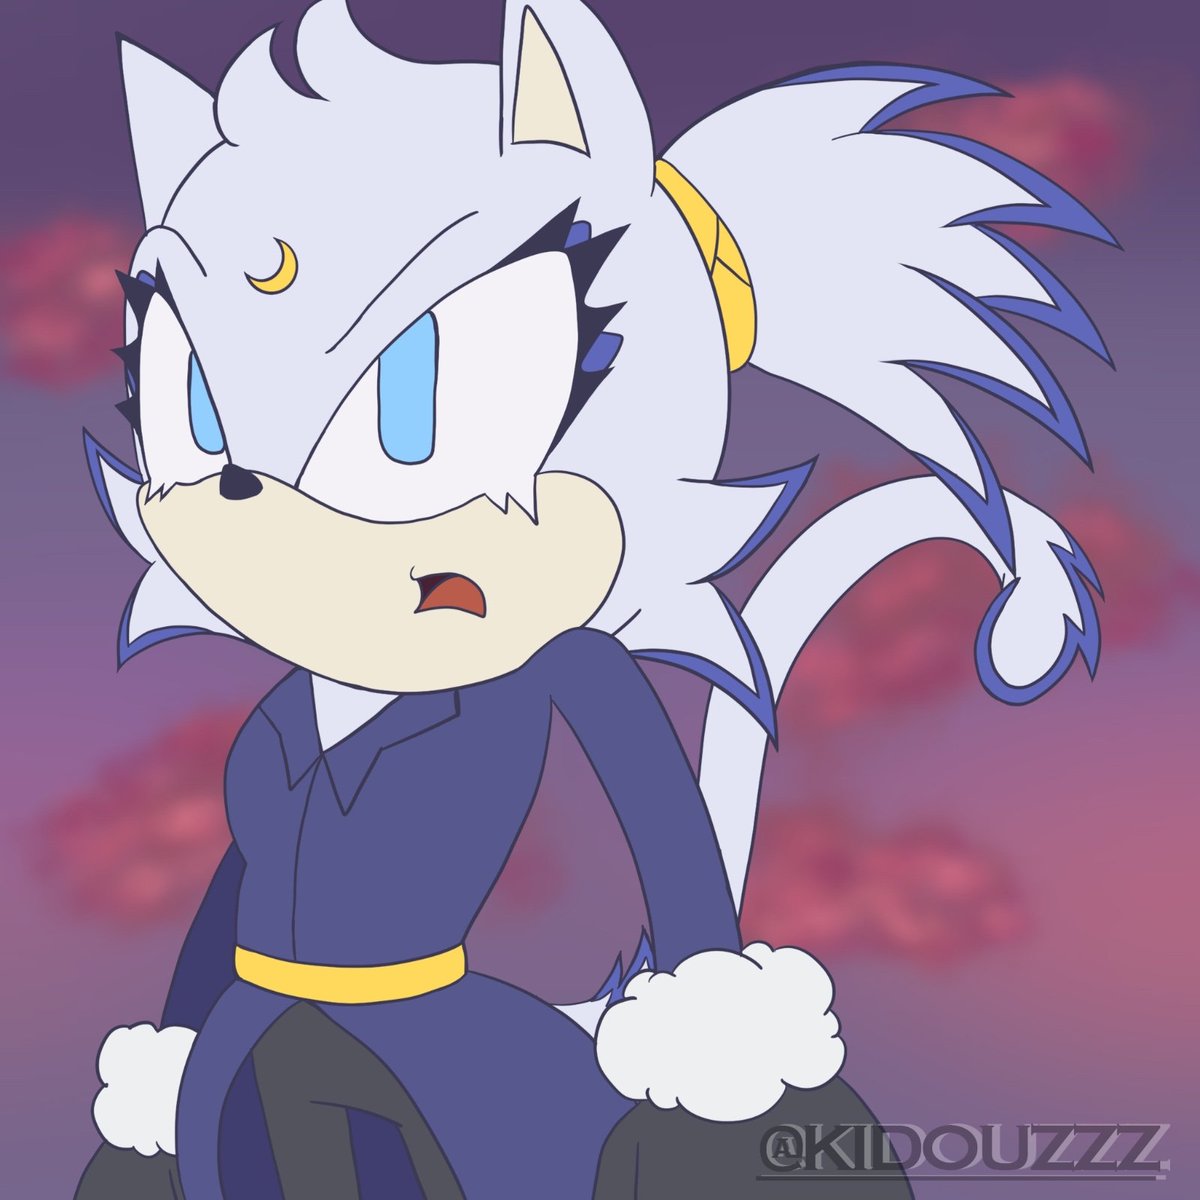 what if...

BRAVE THE CAT AU! 
In this au, Blaze's dimension is the 'main' universe so to speak, Brave would be what has been the 'Shadow' of that dimension‼️
Maybe I'll bring more content in the future about this au along with an origin story
#Blazethecat #SonicTheHedegehog